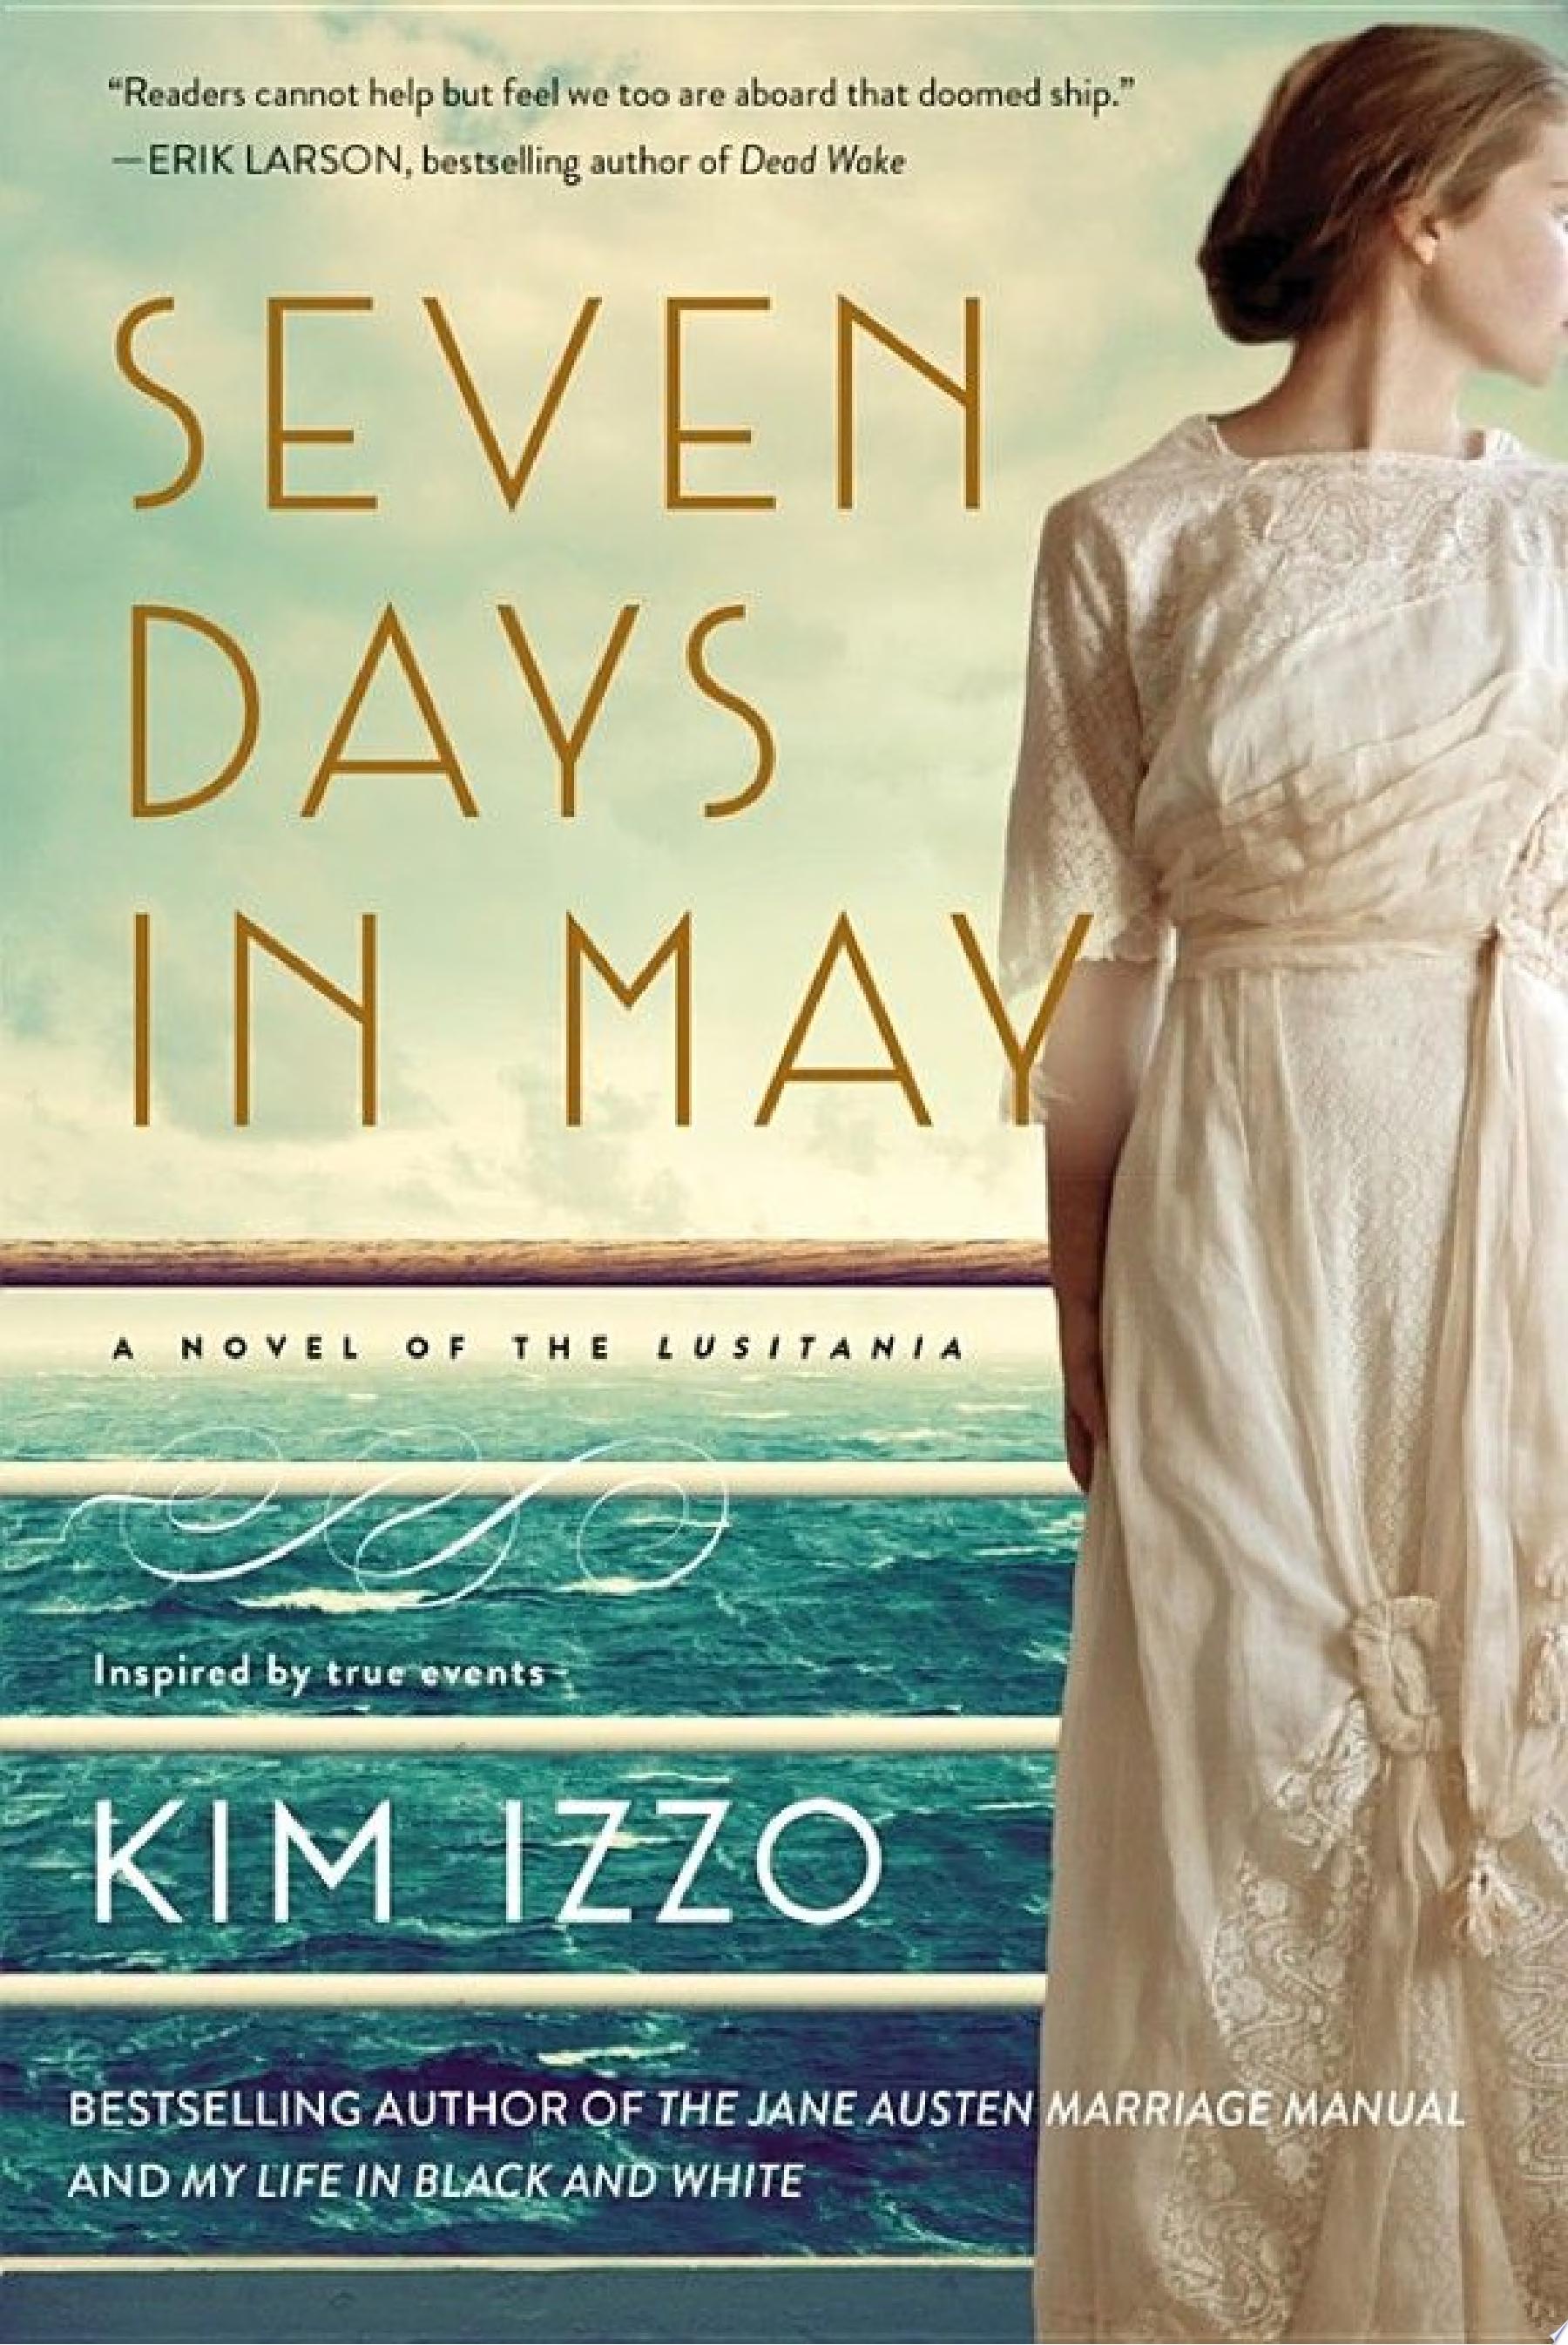 Image for "Seven Days in May"